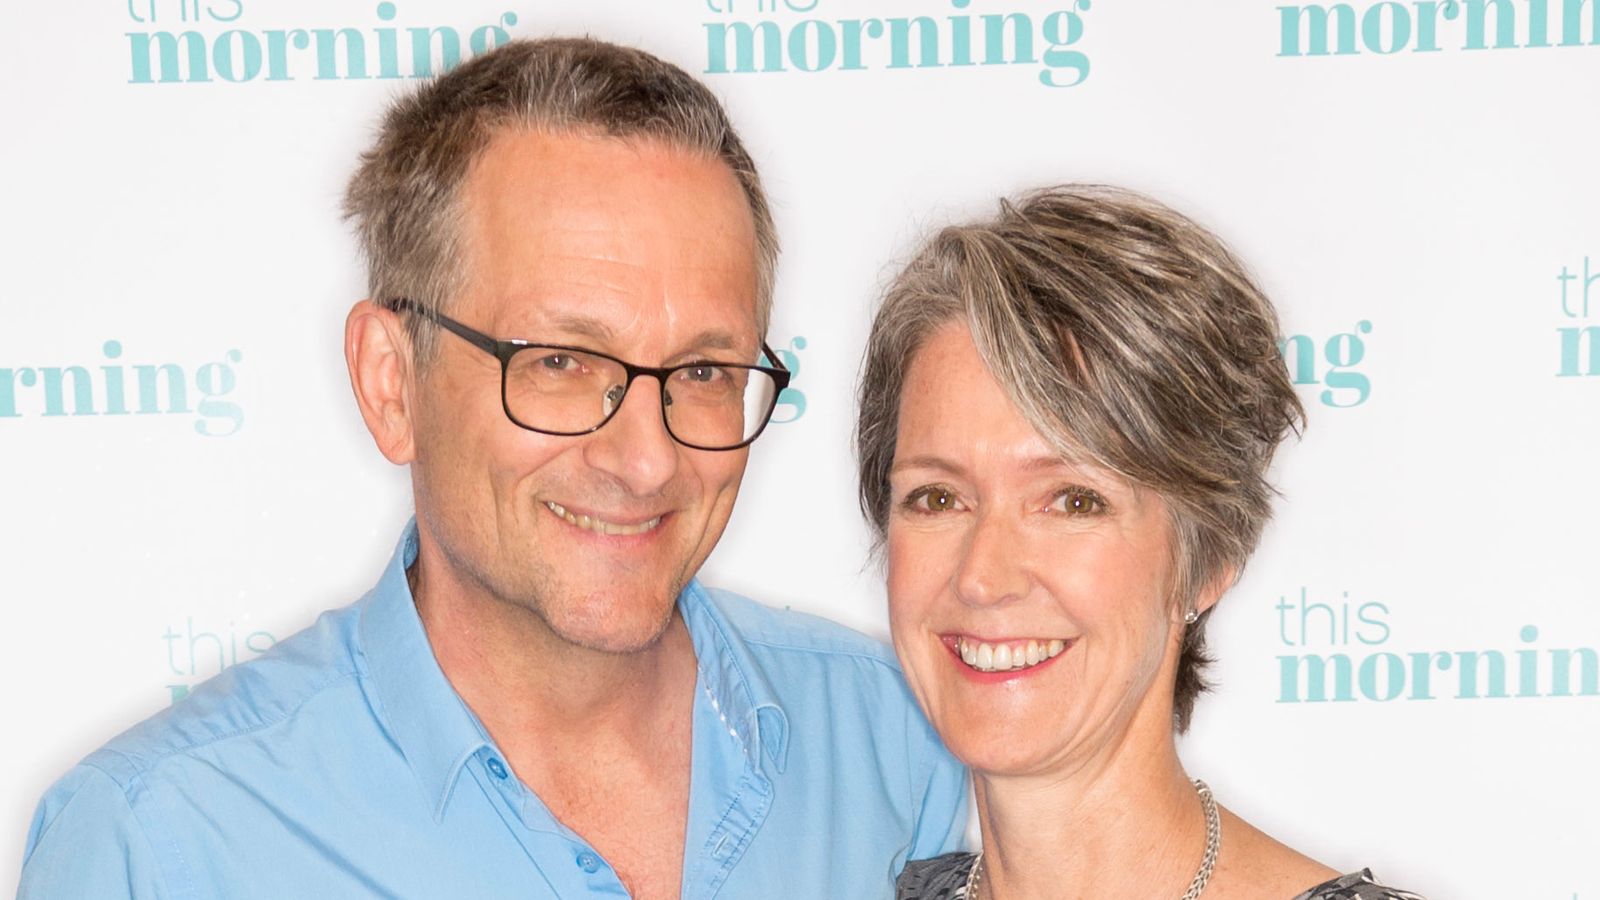 Dr Michael Mosley: Tributes pour in for 'national treasure' TV doctor, as wife says he 'so very nearly made it'